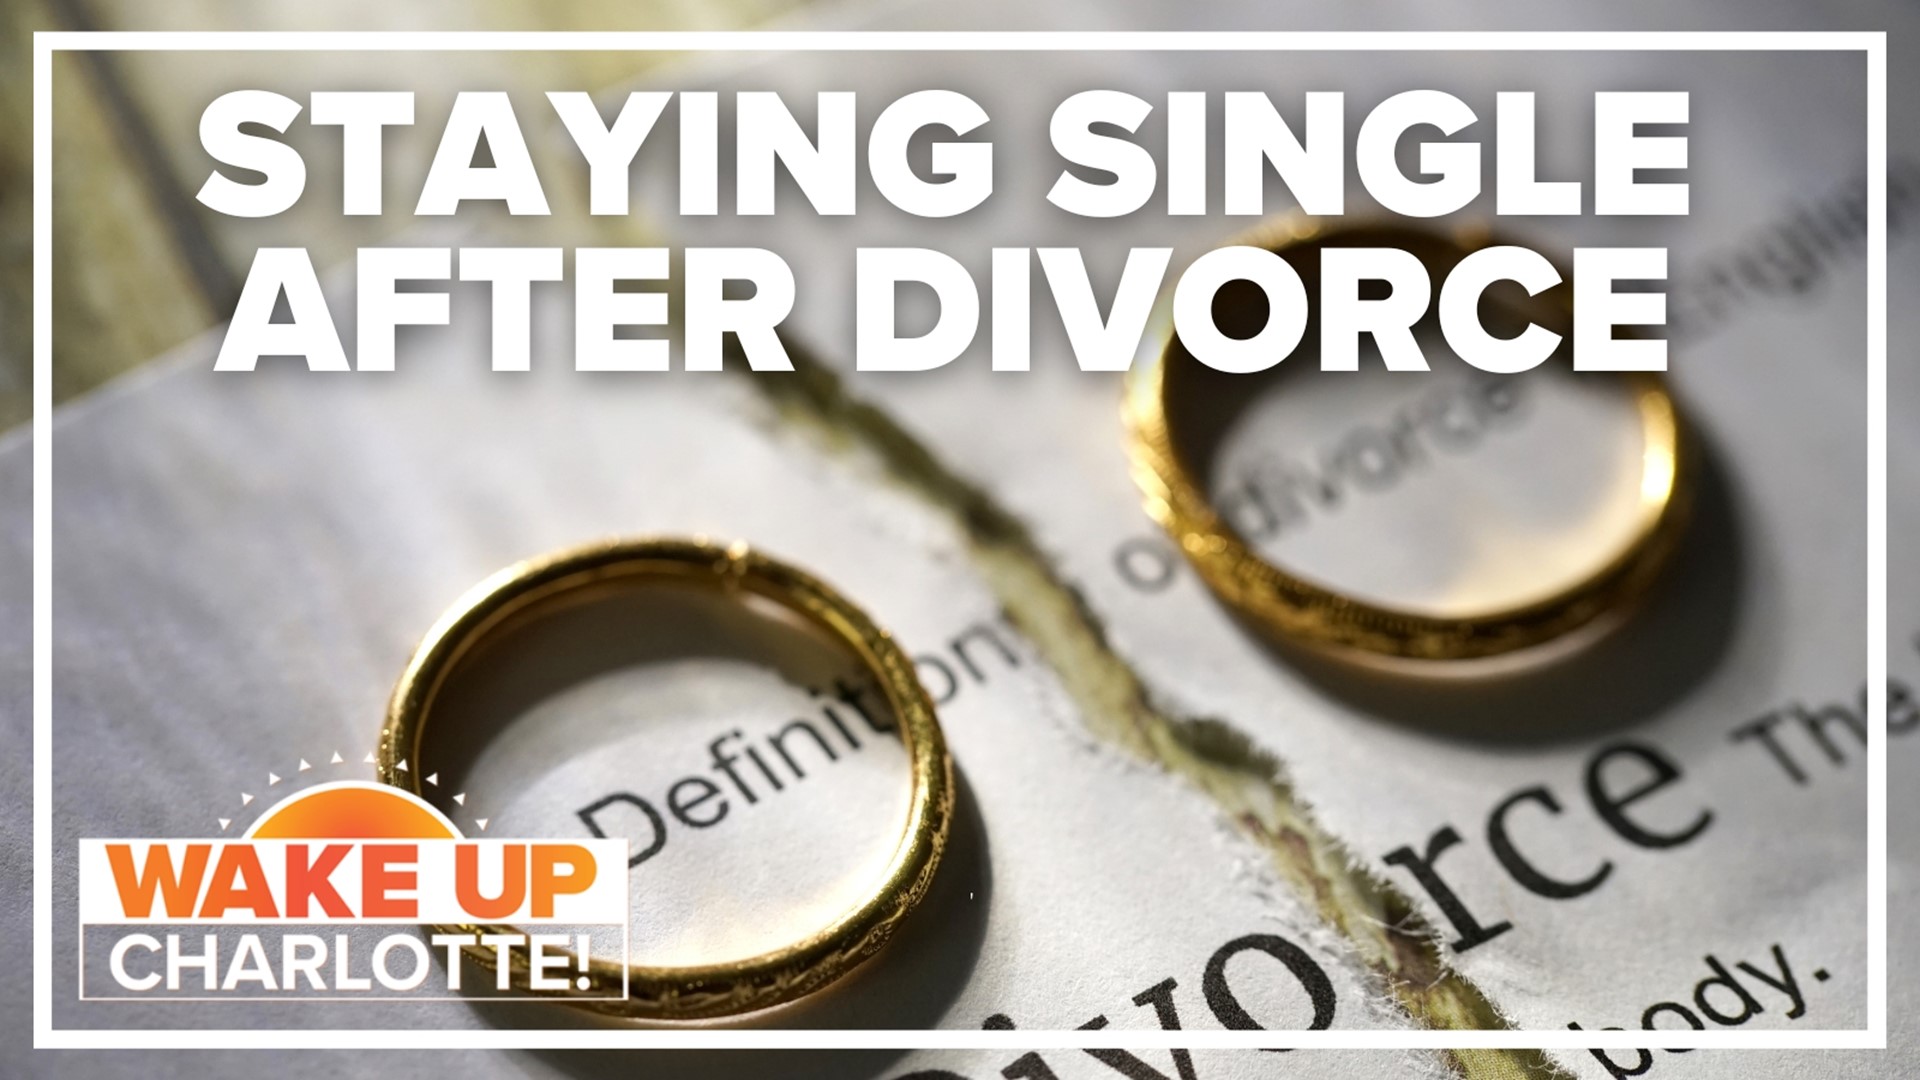 Researchers couldn't find a big reason why so many folks stay single after a divorce, but write economic resources, social ties, and health aren't big factors.